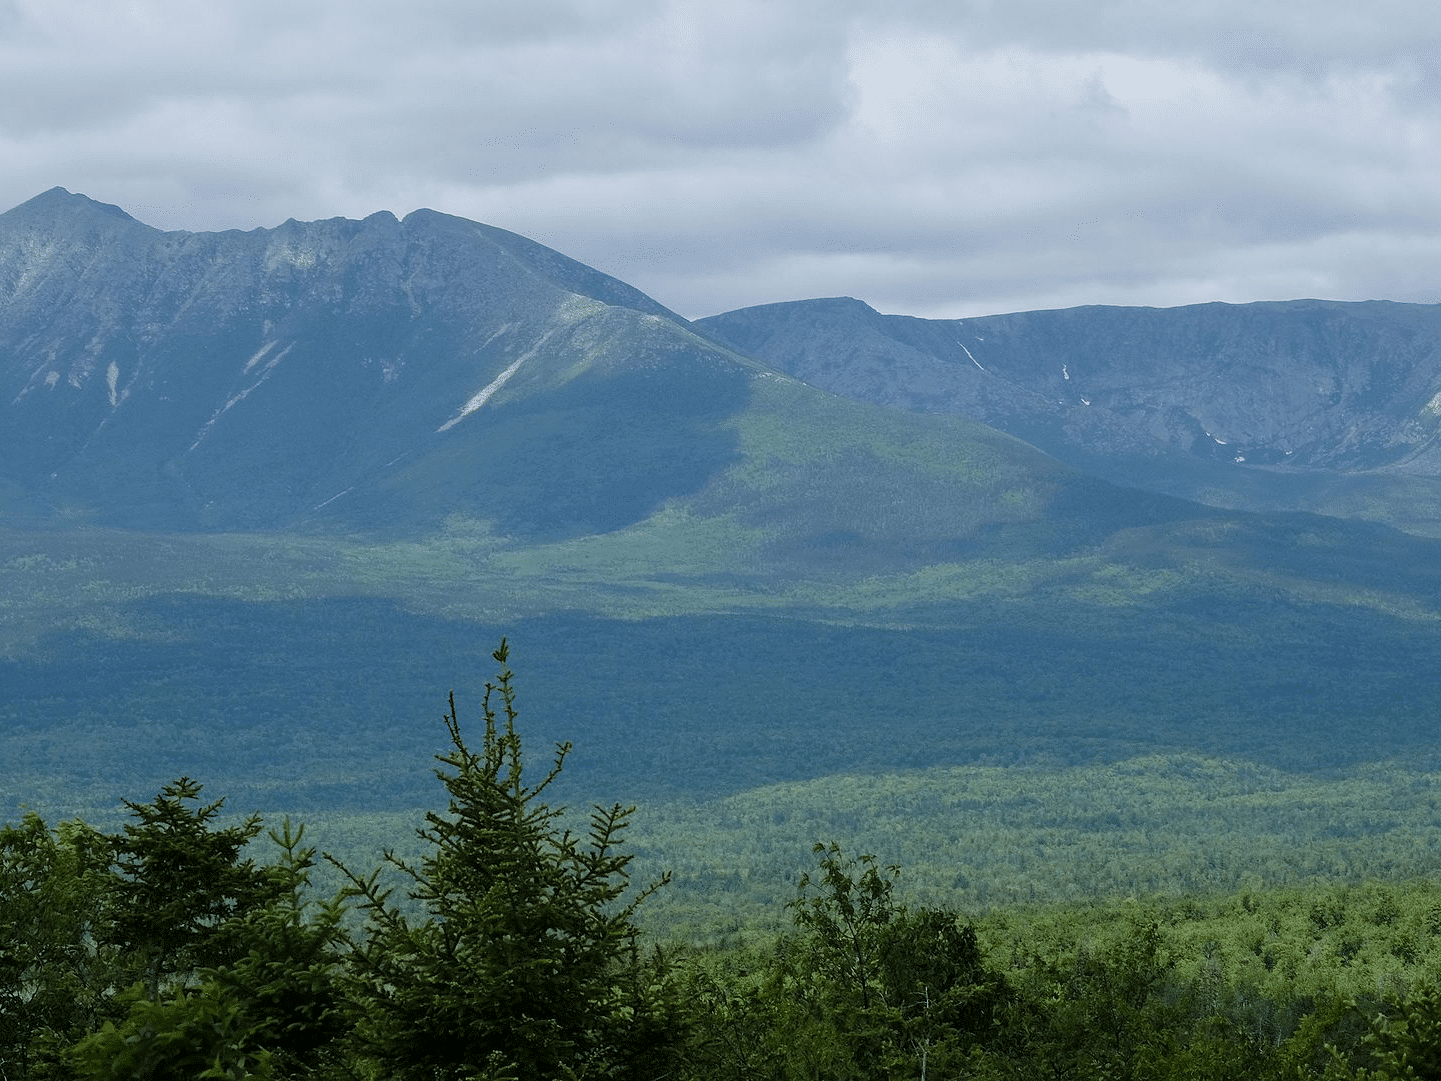 The Katahdin Woods and Waters National Monument